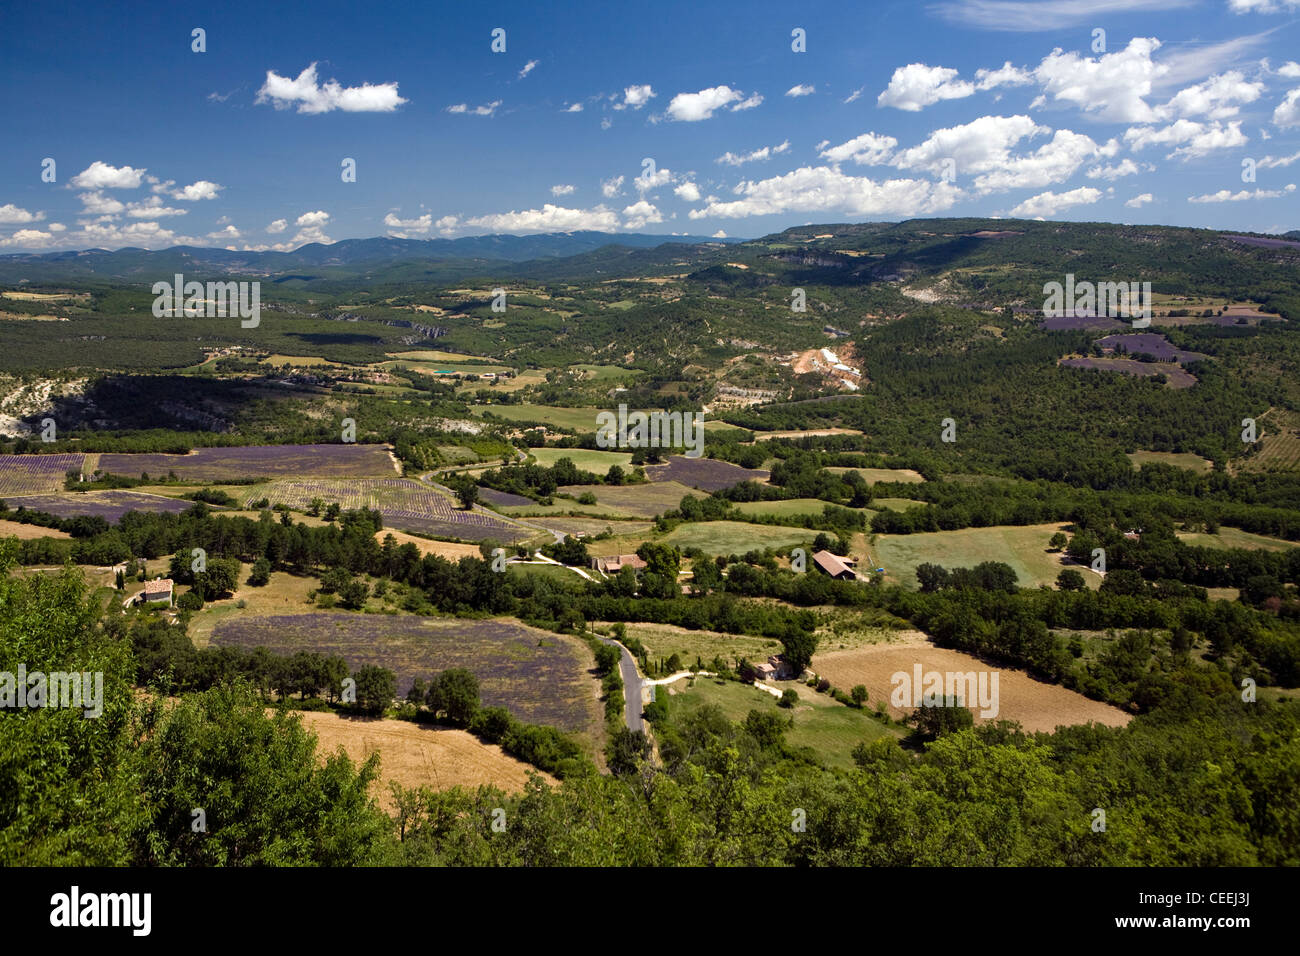 Viens Luberon Viens Provence France Parc Naturel Régional du Luberon rural France french countryside french property Stock Photo